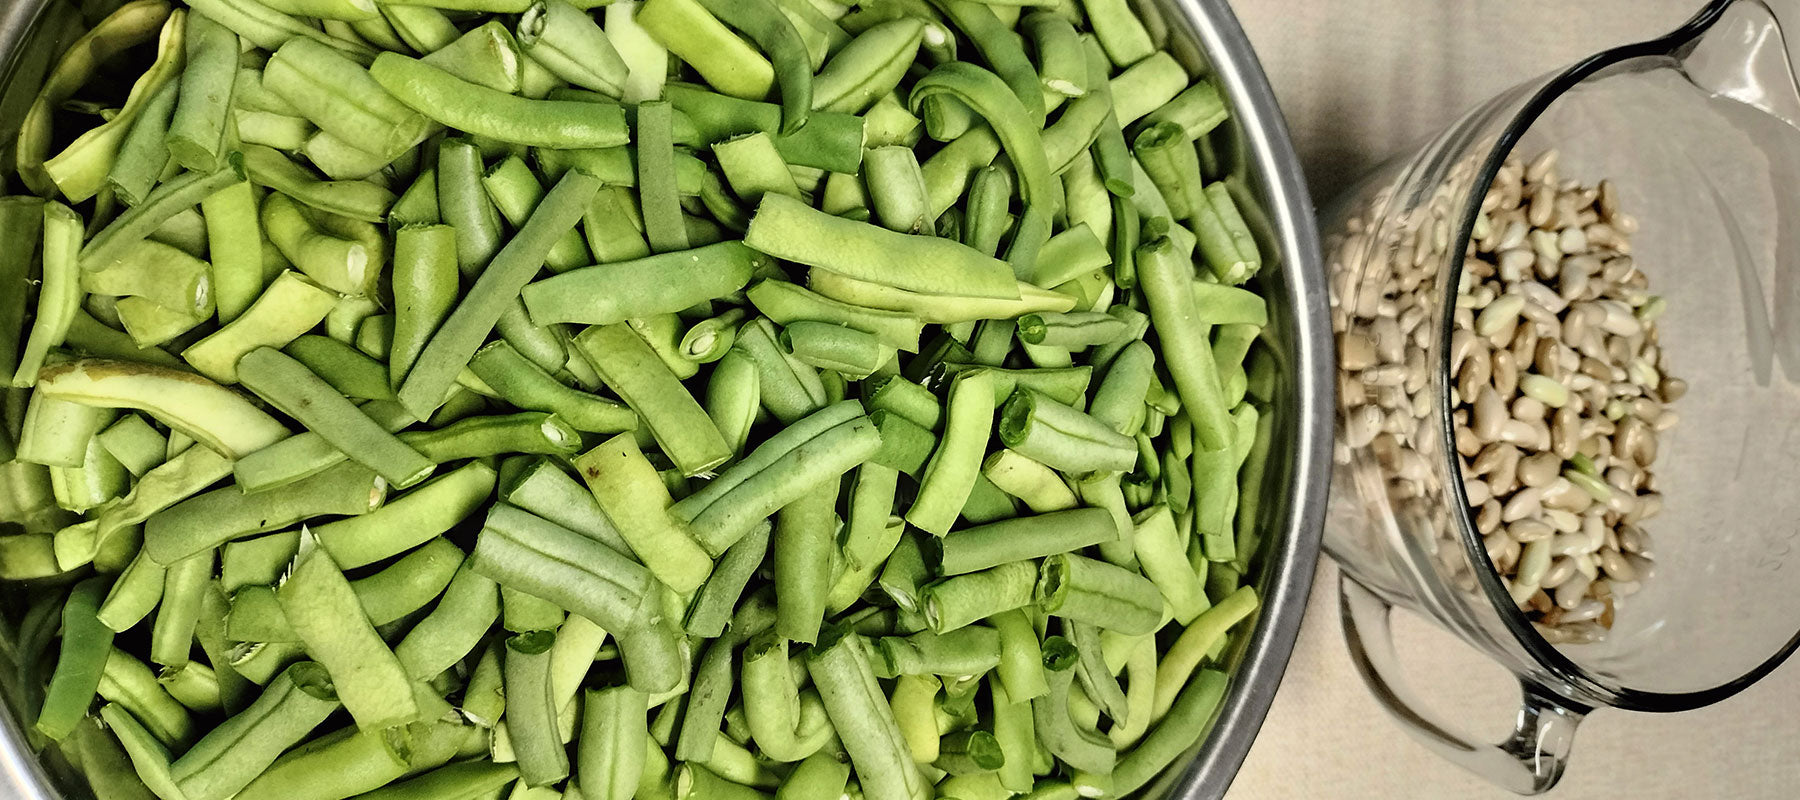 Canning & Dehydrating Green Beans